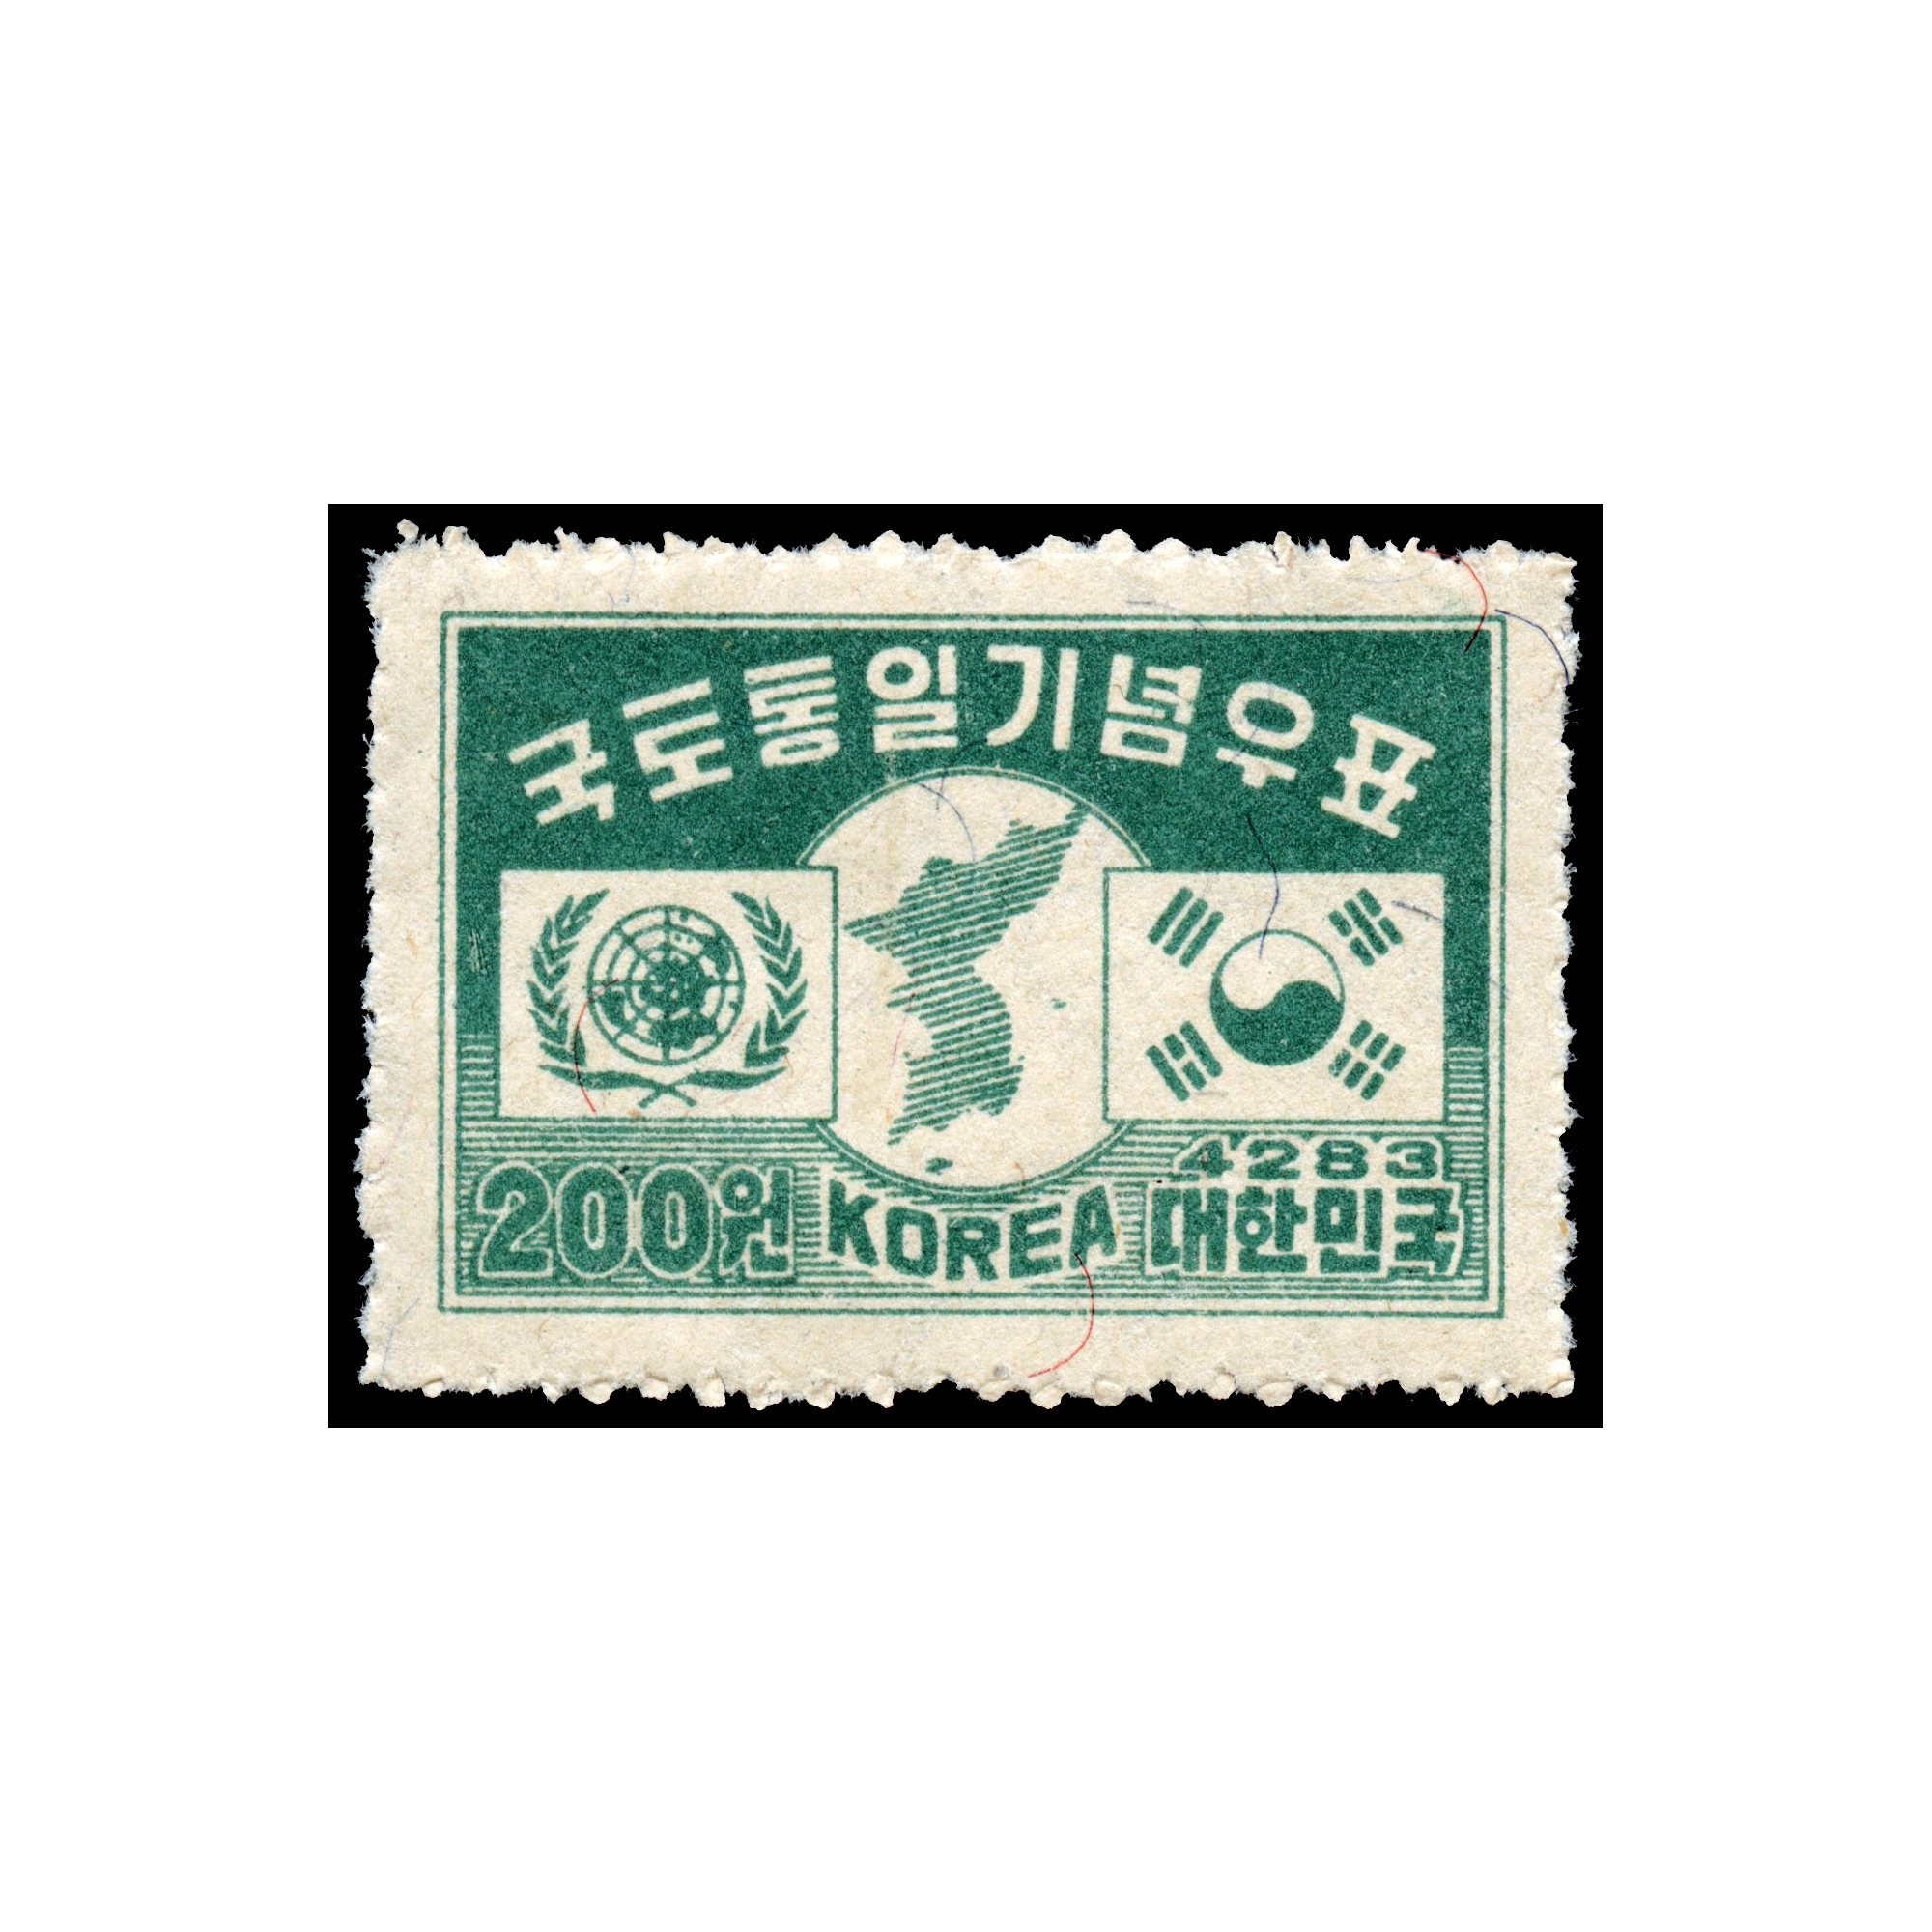 Unification of Korea Stamp